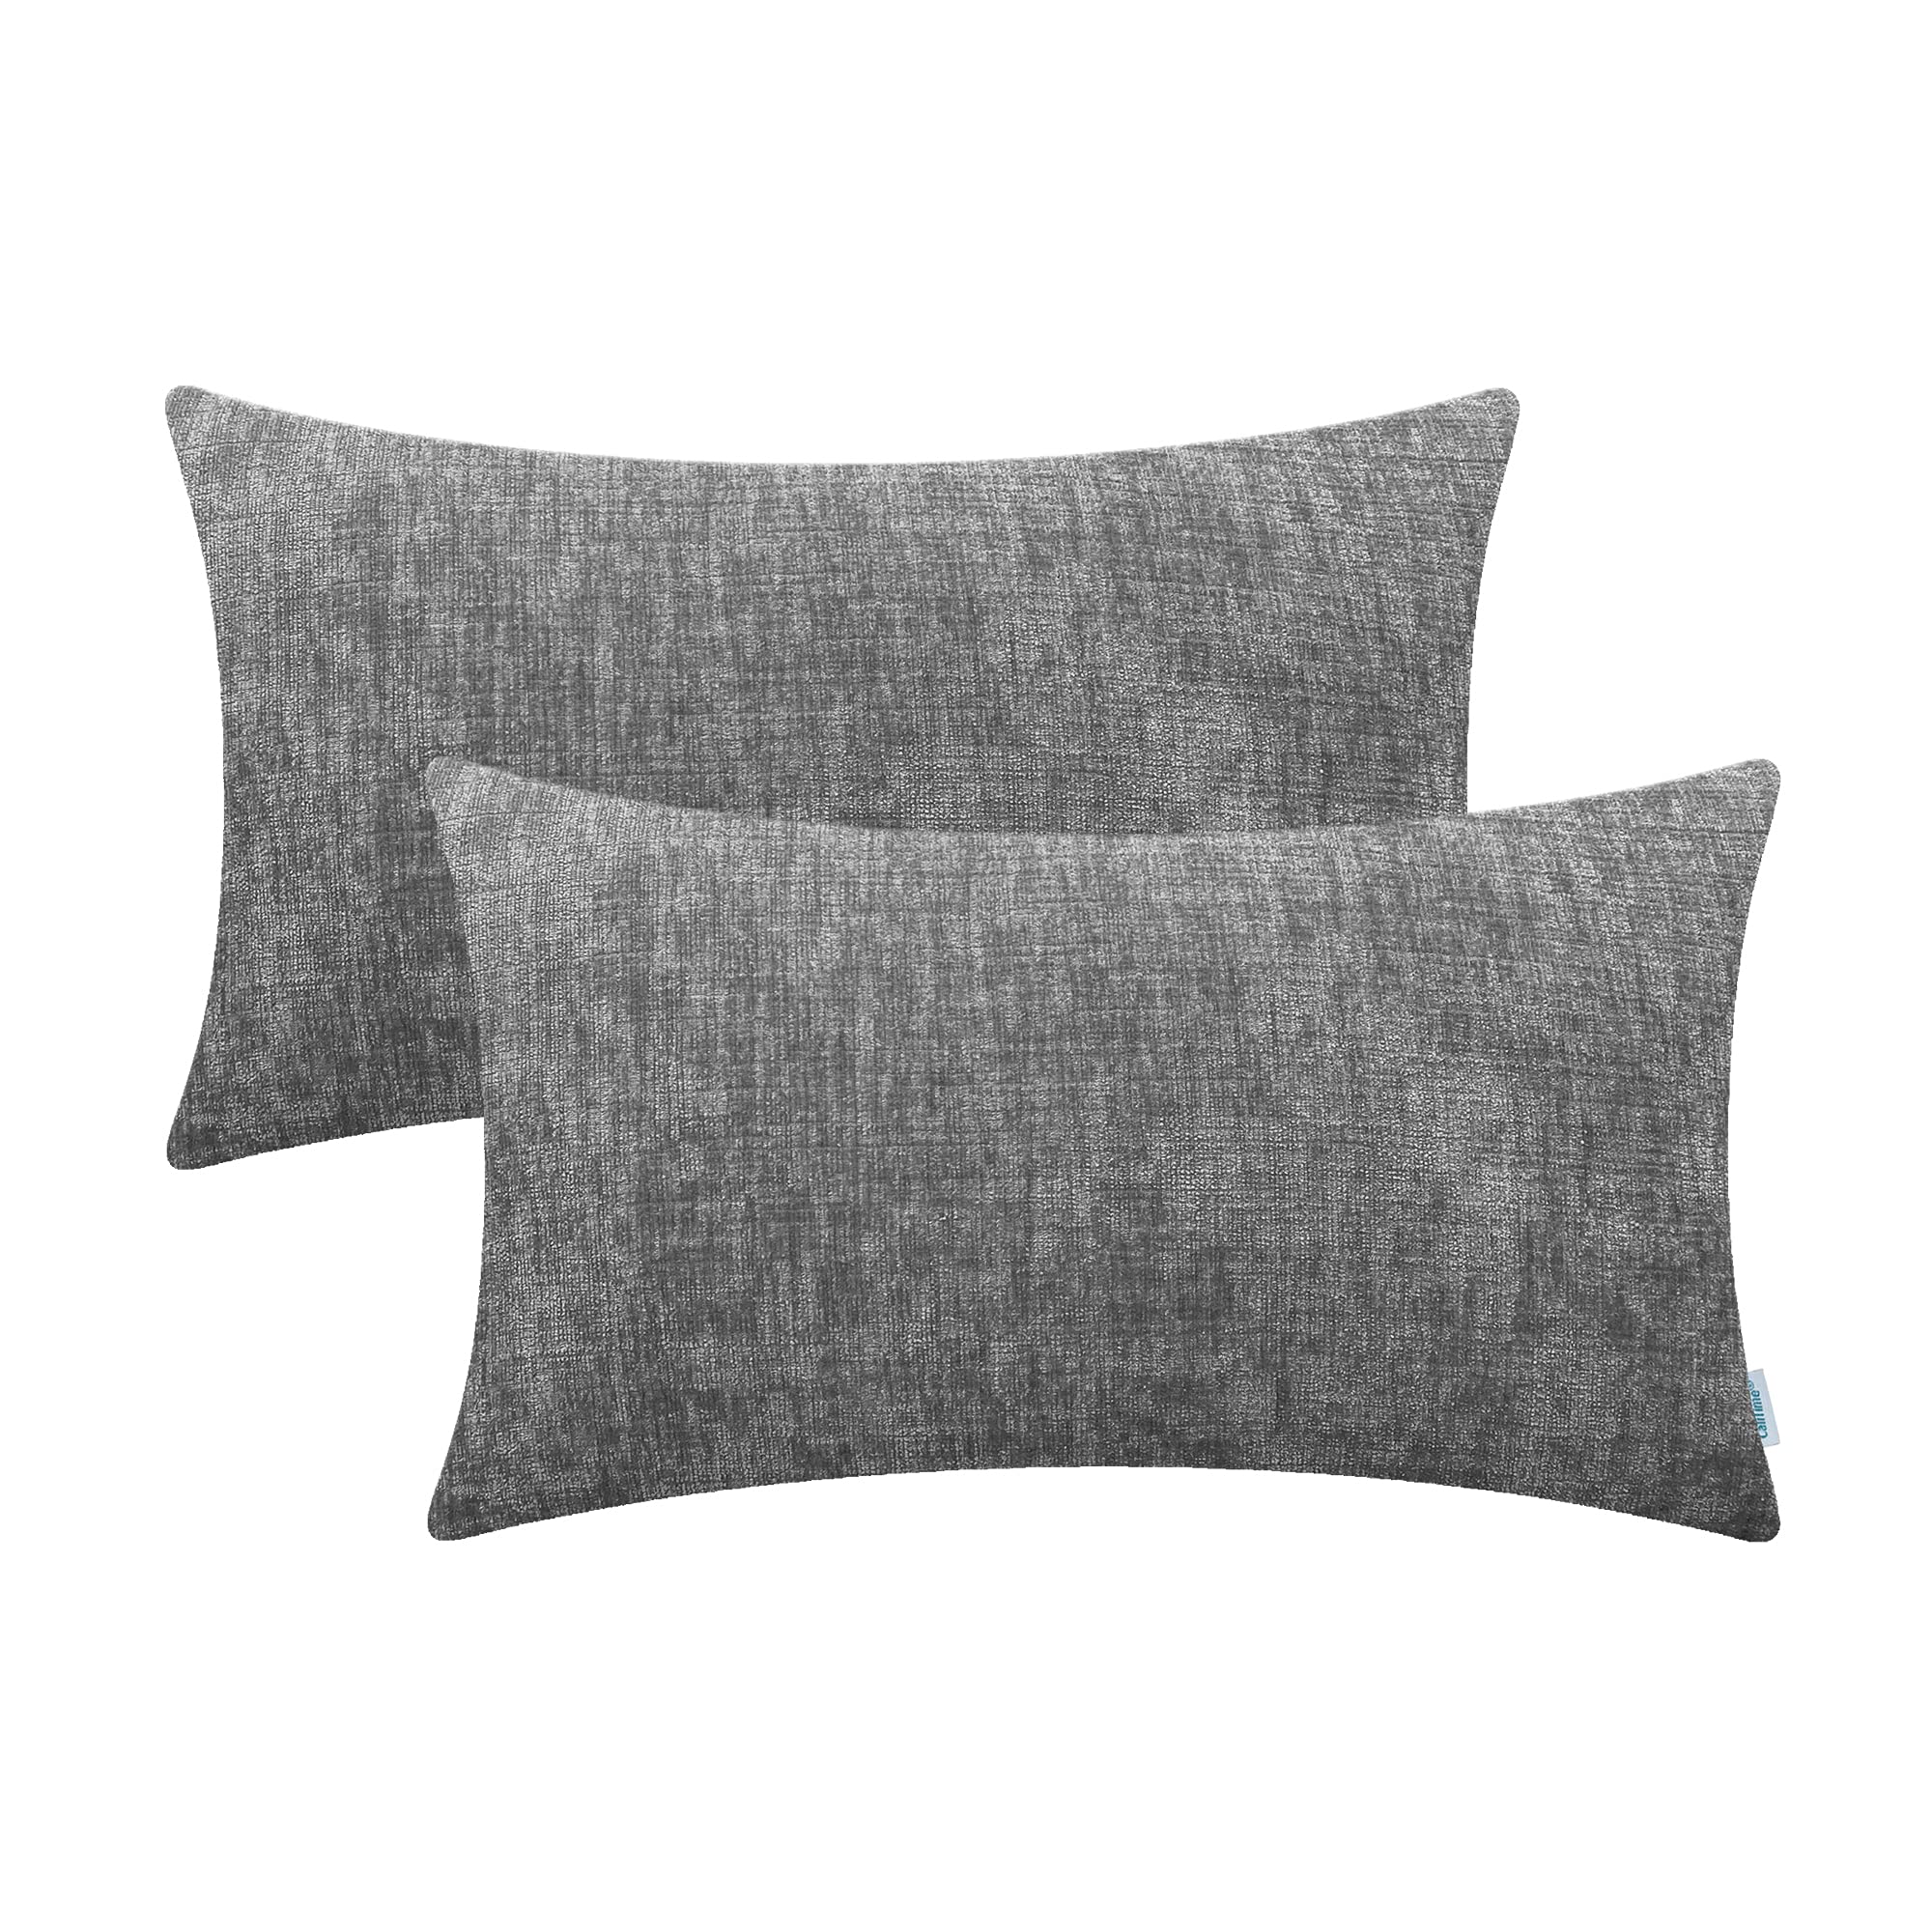 caliTime Pack of 2 cozy Pillow covers cases for couch Sofa Home Decoration Solid Dyed Soft chenille 12 X 20 Inches Medium grey